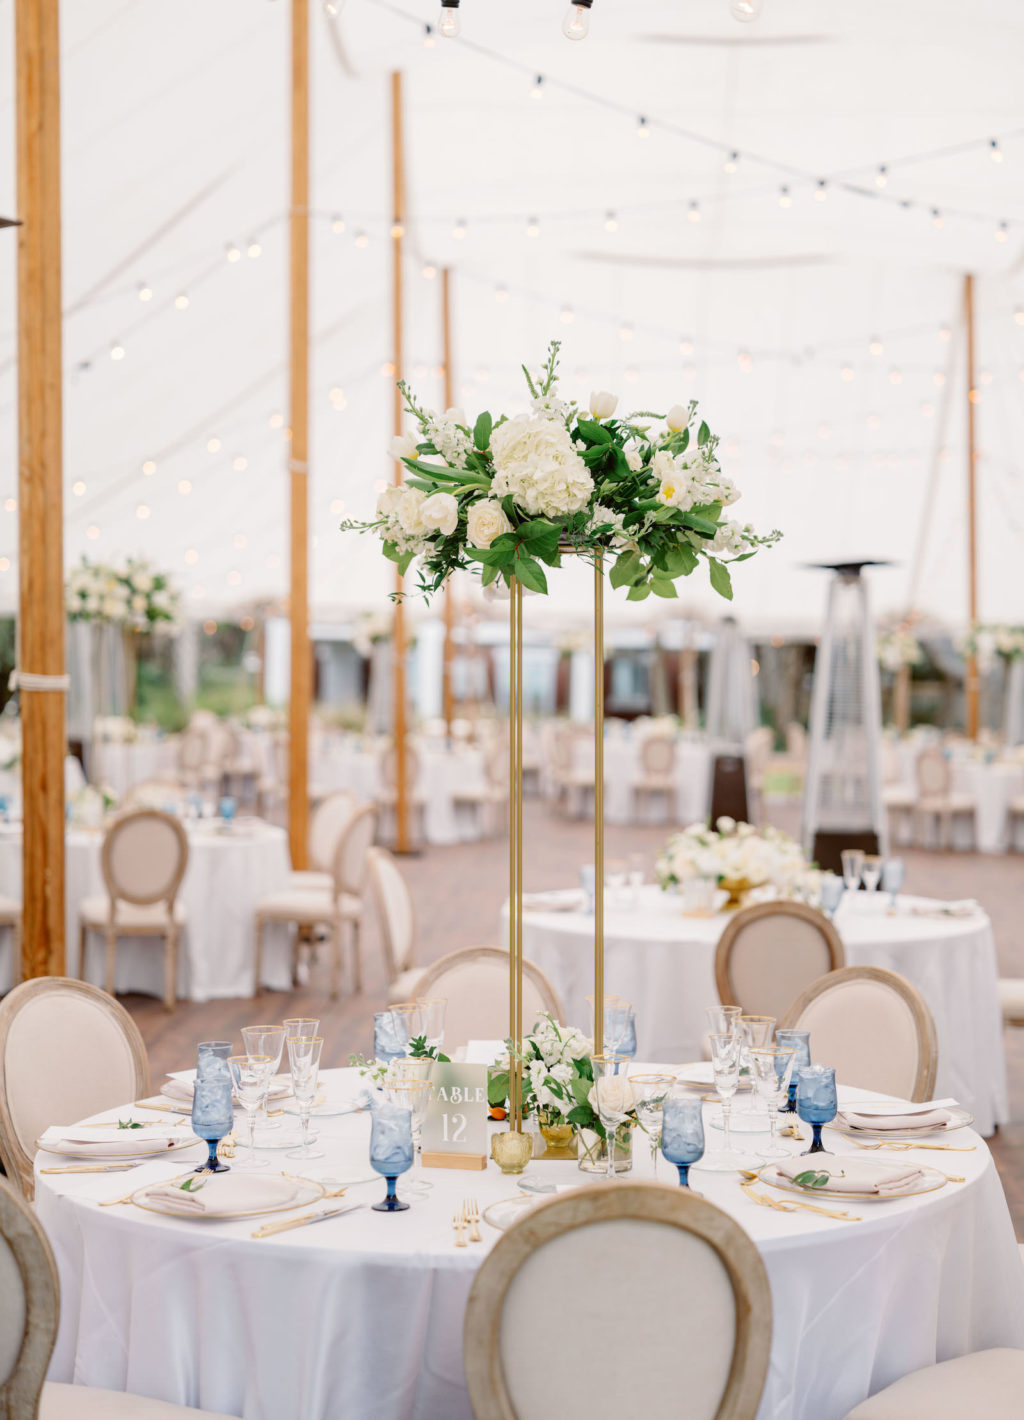 Elegant Luxurious Wedding Reception Decor, French Country Dining Chairs, Blue Water Goblets, Tall Gold Stand with White and Greenery Floral Centerpiece, White Tent with Bistro Hanging Lights | Tampa Bay NK Productions Wedding Planning